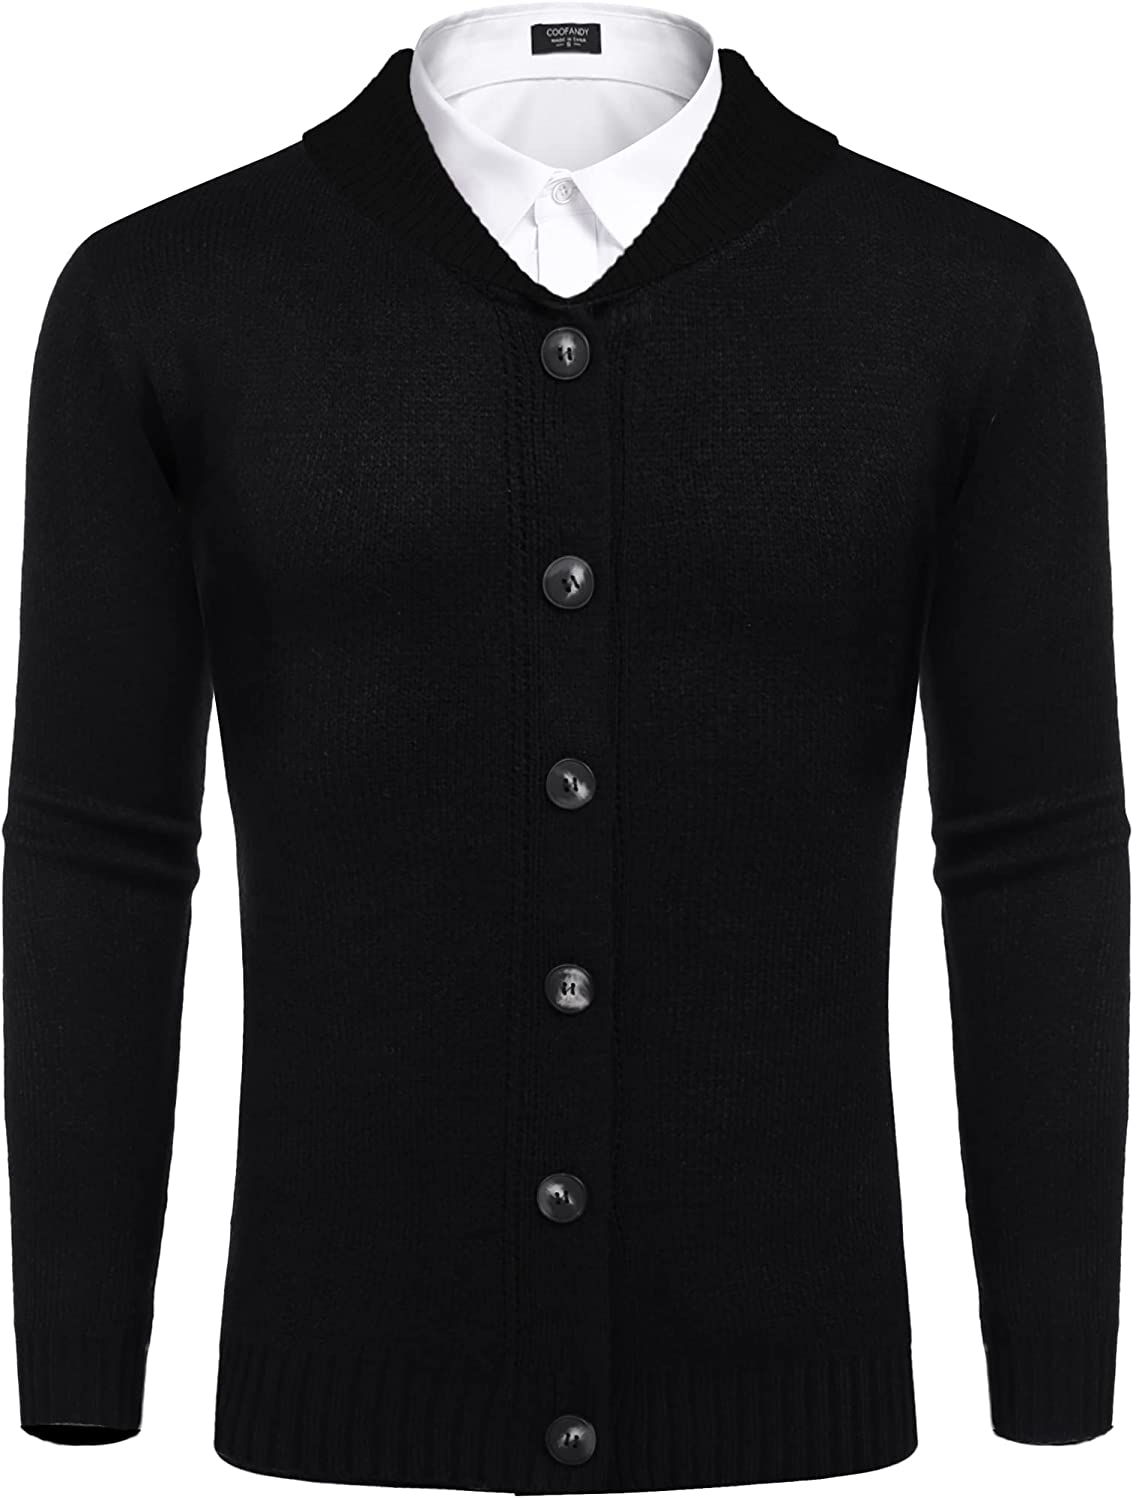 COOFANDY Mens Christmas Cardigan Sweater Shawl Collar Knitted Xmas Cardigans Button Up Knitwear 